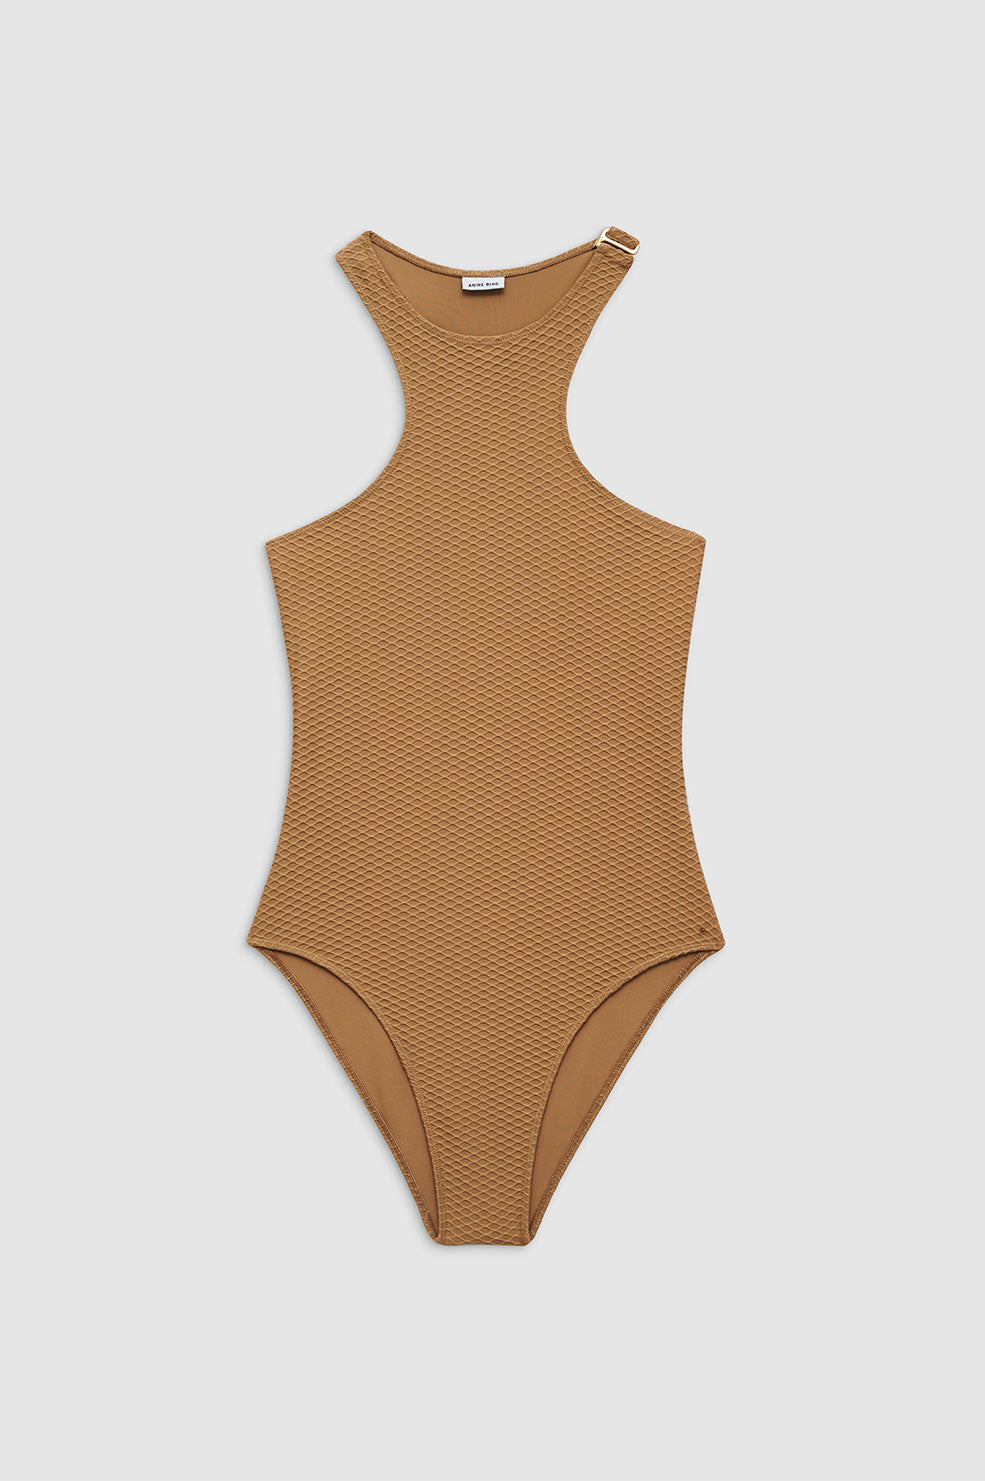 ANINE BING Morgan One Piece - Camel - Front View